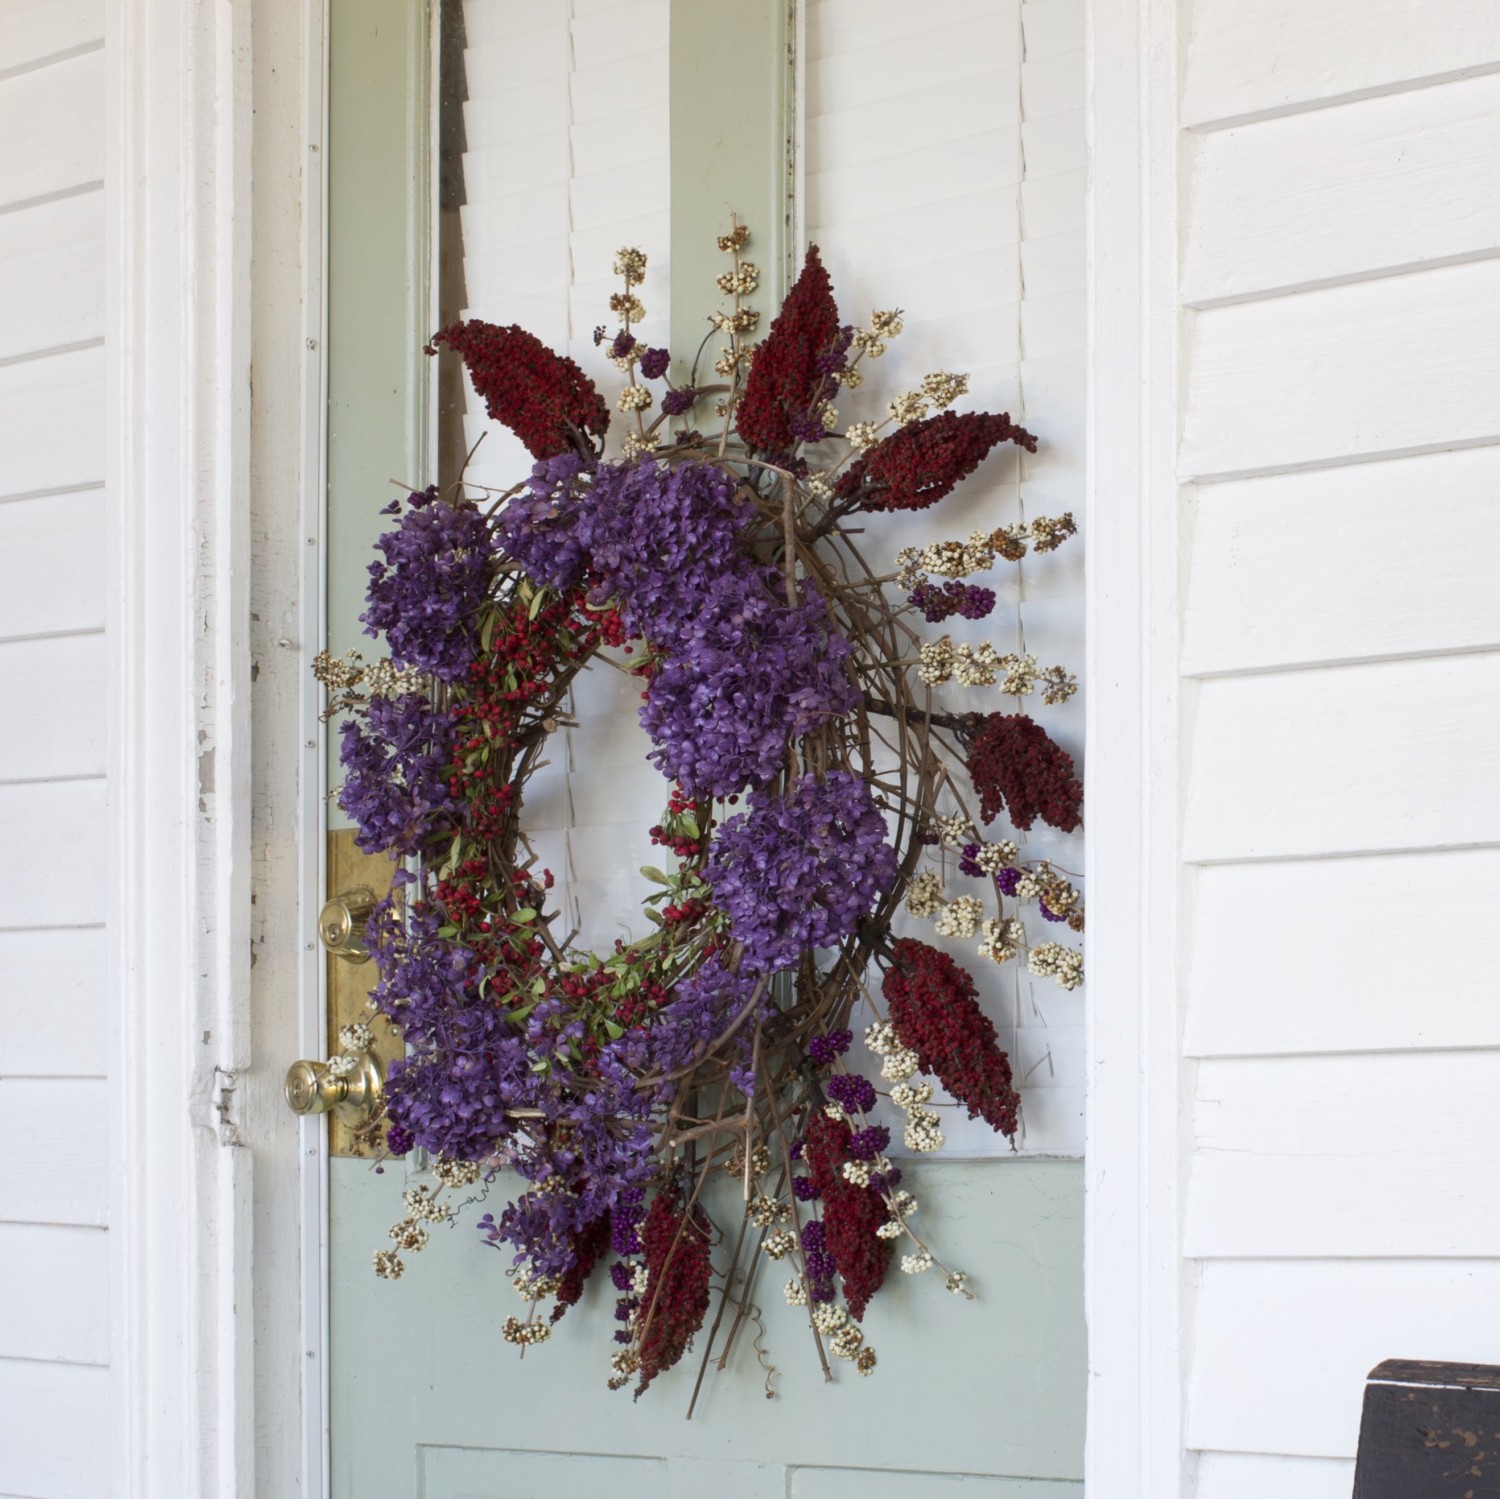 A wreath made of dried purple hydrangeas, pyracantha, sumac, and beauty berries hangs on Ryan Gainey's cottage door.